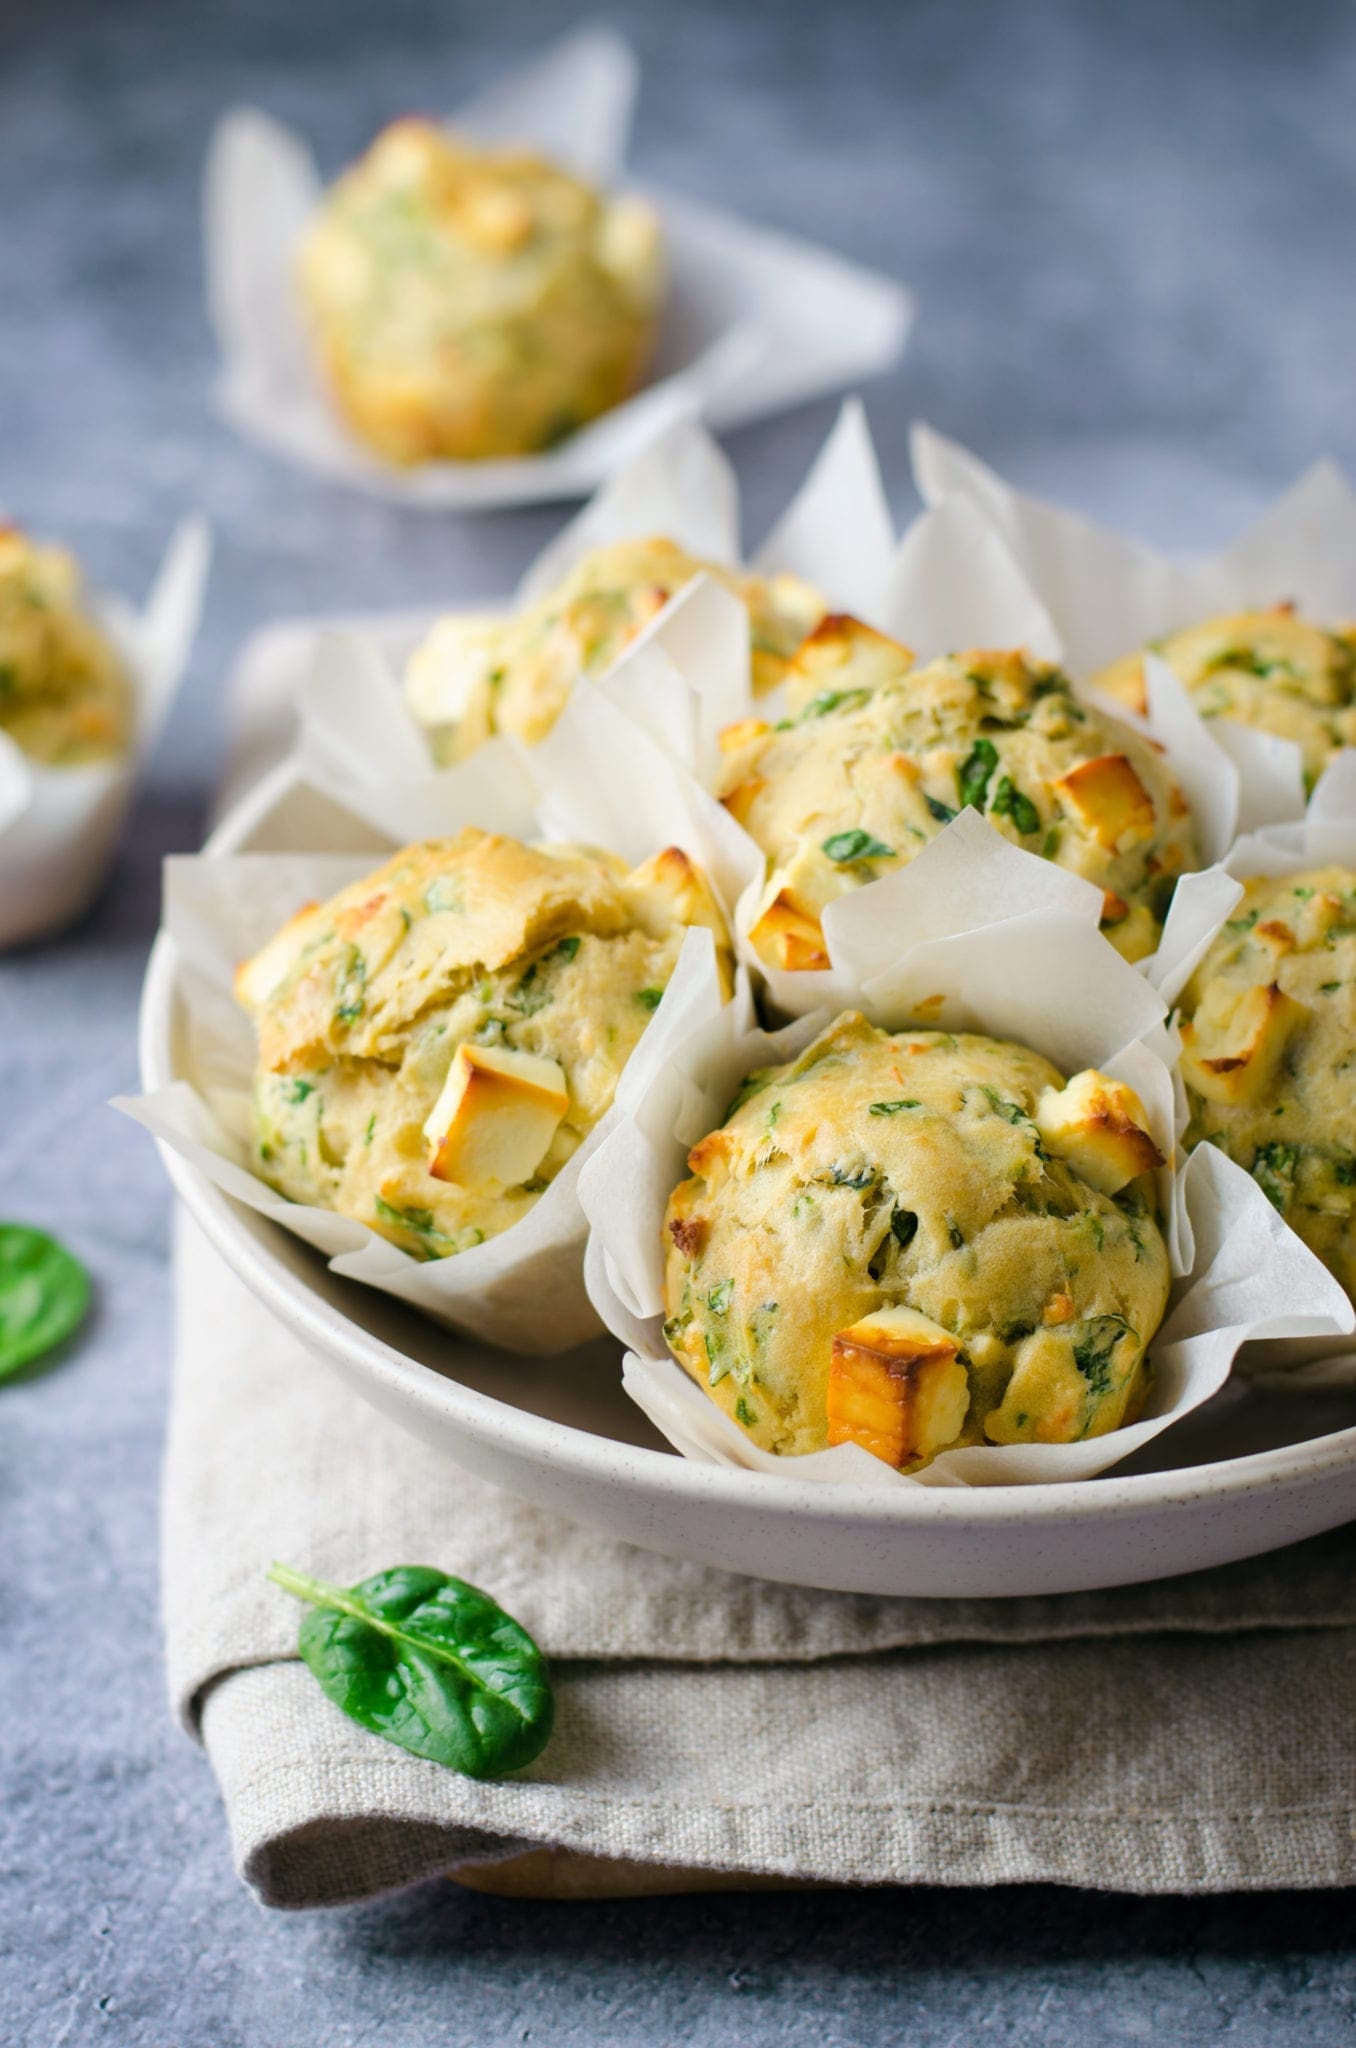 Carb Free Spinach & Egg Muffins - Unislim